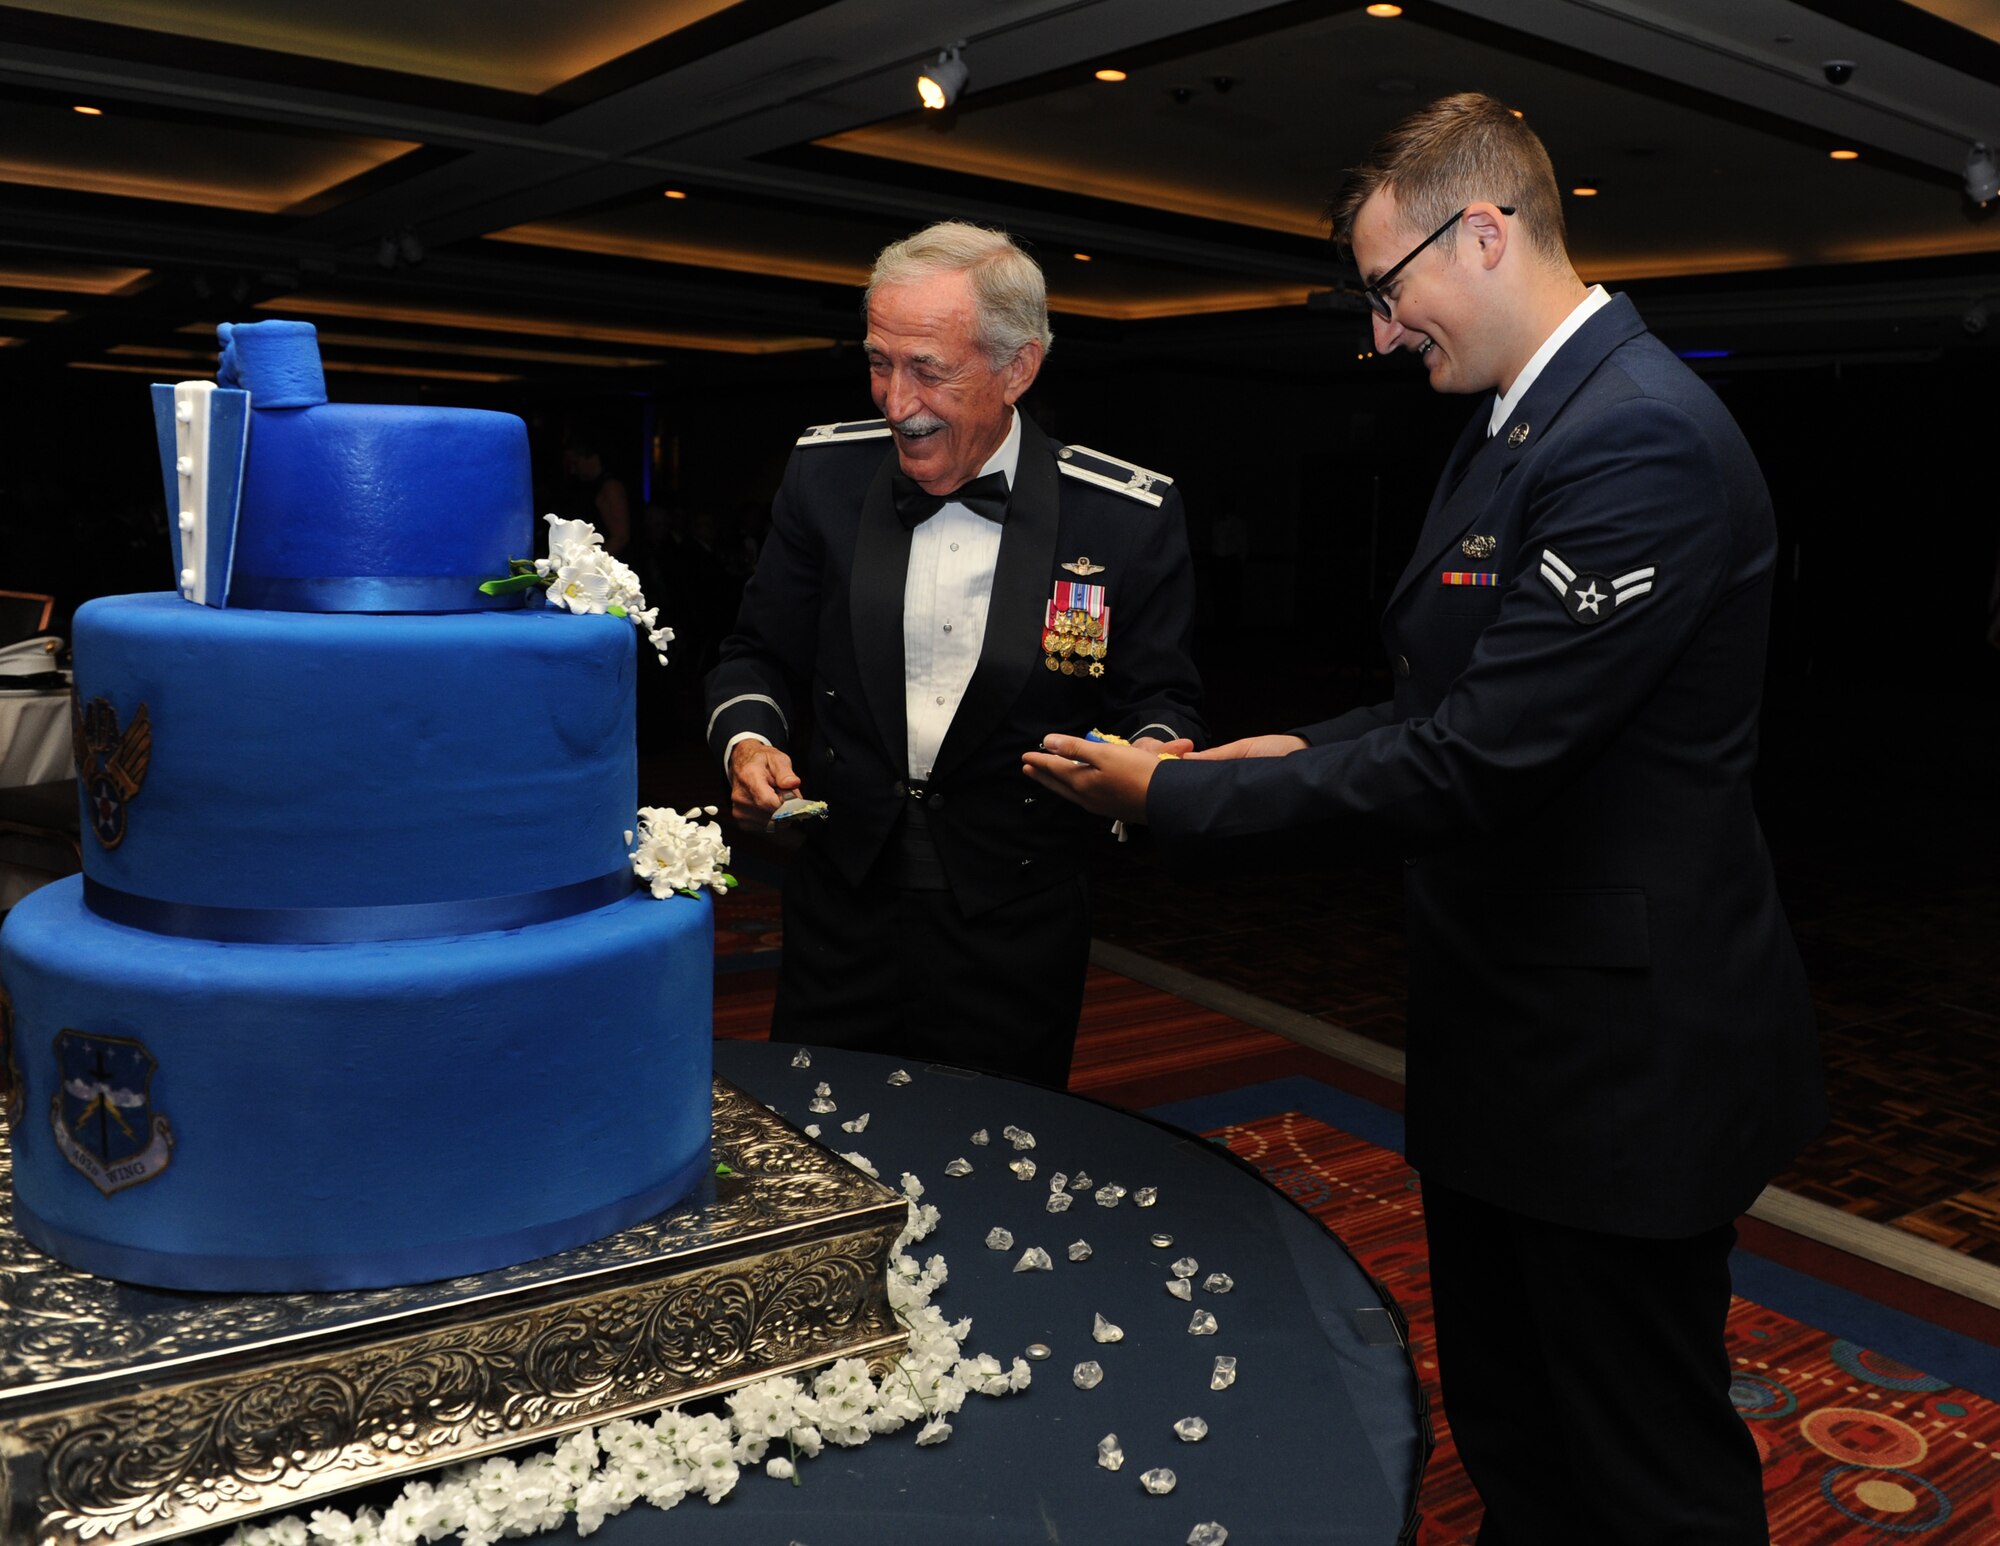 Retired Col. Sid Wright and Airman 1st Class William Henderson, 81st Training Support Squadron network administrator, participate in a cake cutting ceremony during the Keesler Air Force Ball at the Imperial Palace Casino Sept. 24, 2016, Biloxi, Miss. Wright was the oldest Airman at the ball while Henderson was the youngest; it is tradition for the oldest and youngest Airmen in attendance to cut the cake. The event was sponsored by the Air Force Association John C. Stennis Chapter #332 to celebrate the Air Force’s 69th birthday and the base’s 75th anniversary. (U.S. Air Force photo by Kemberly Groue/Released)